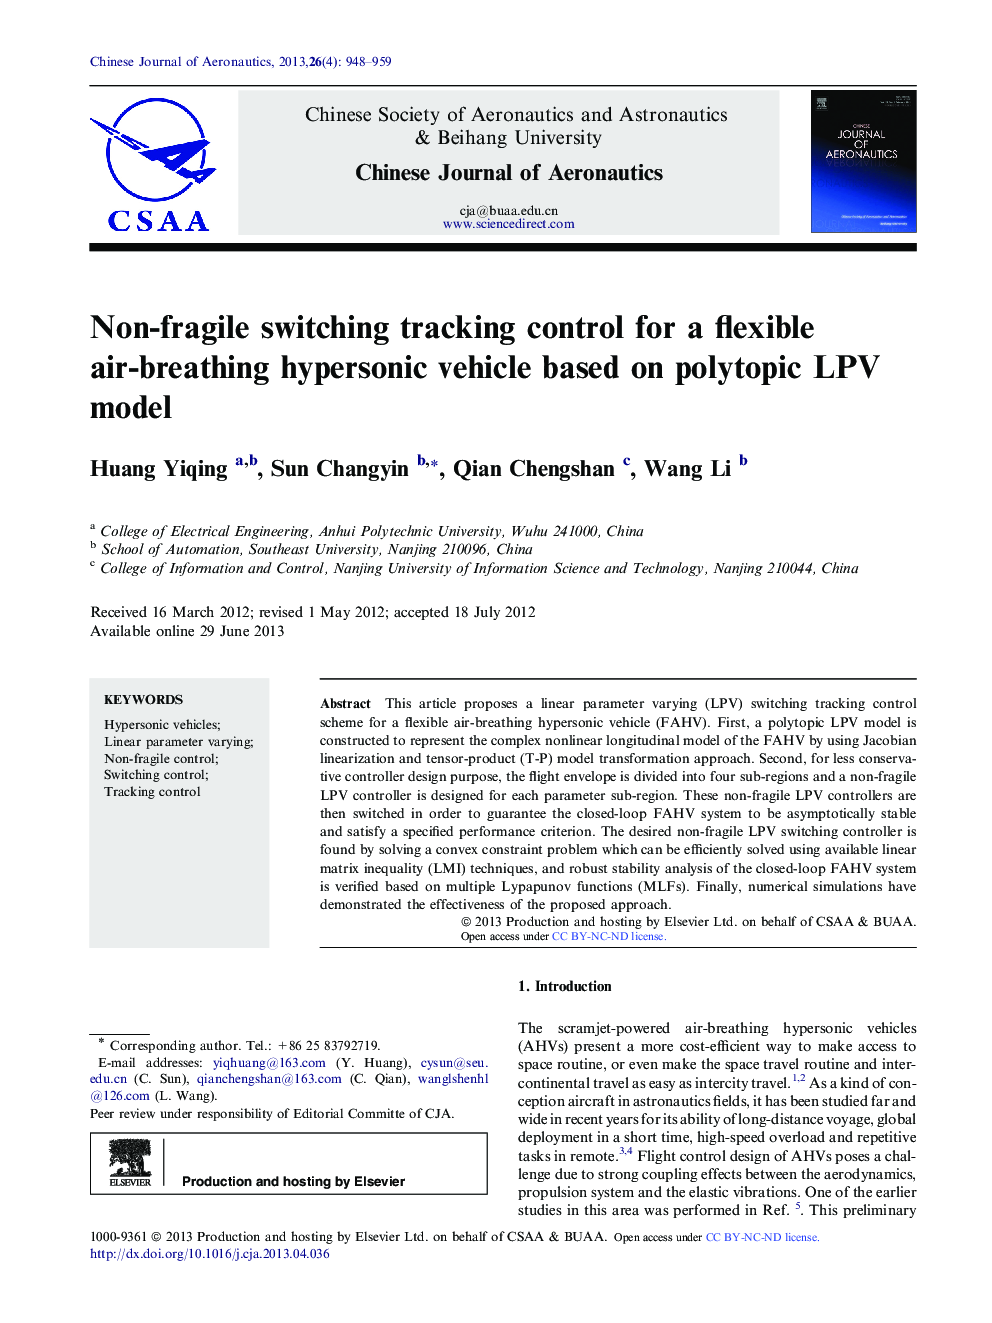 Non-fragile switching tracking control for a flexible air-breathing hypersonic vehicle based on polytopic LPV model 